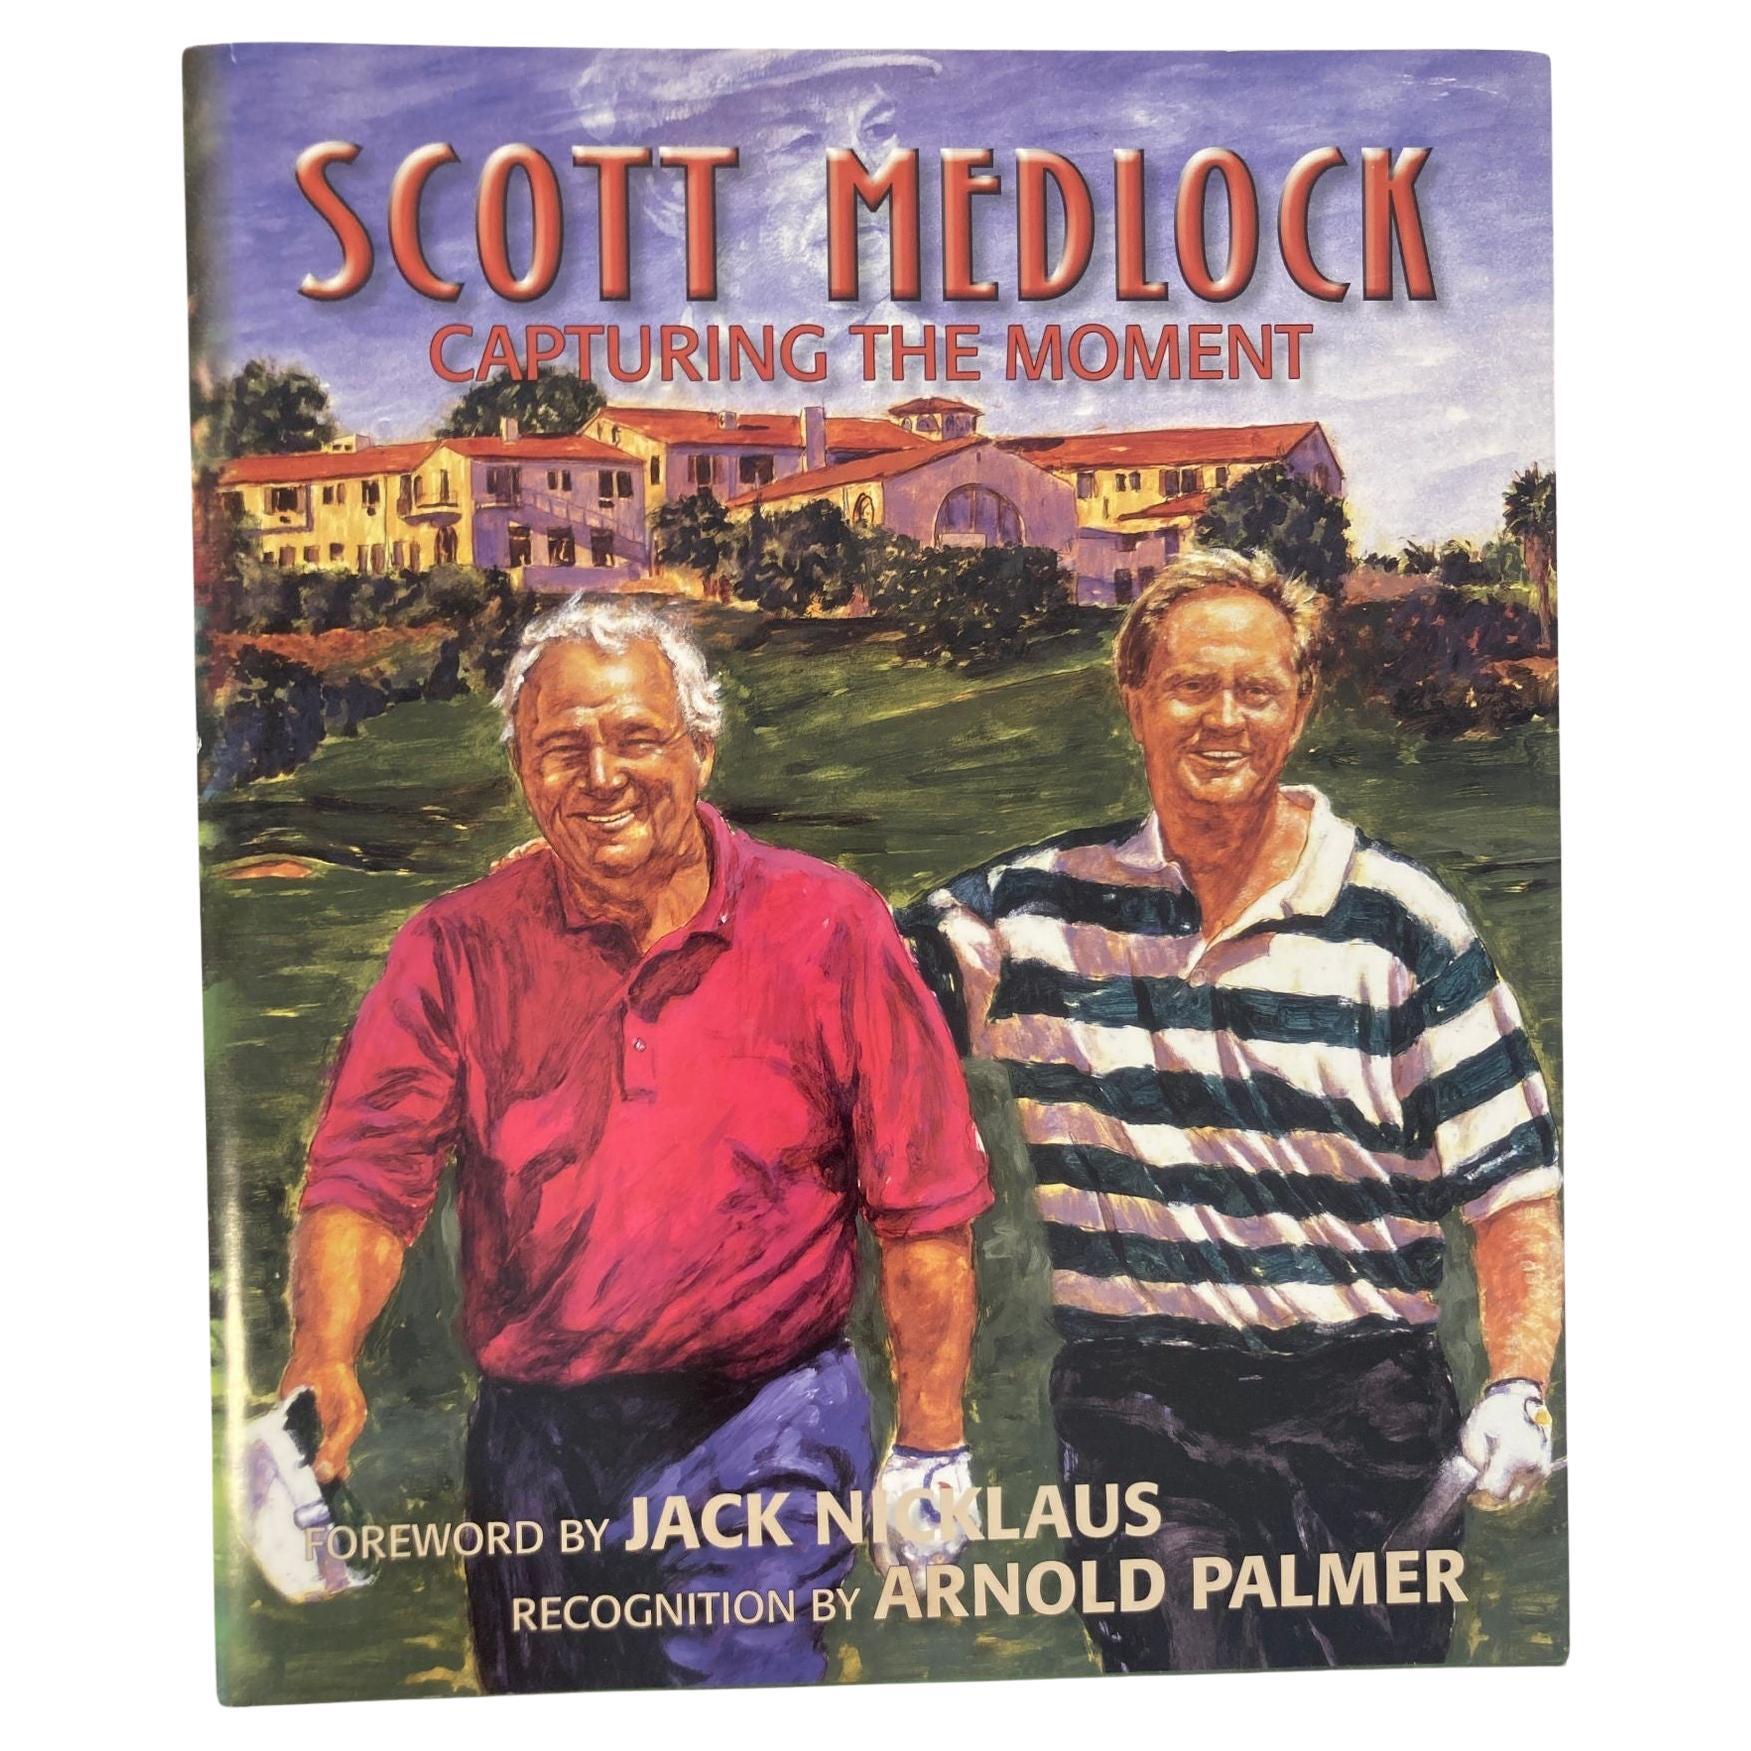 Scott Medlock Capturing the Moment Hardcover Book 2010 Signed For Sale